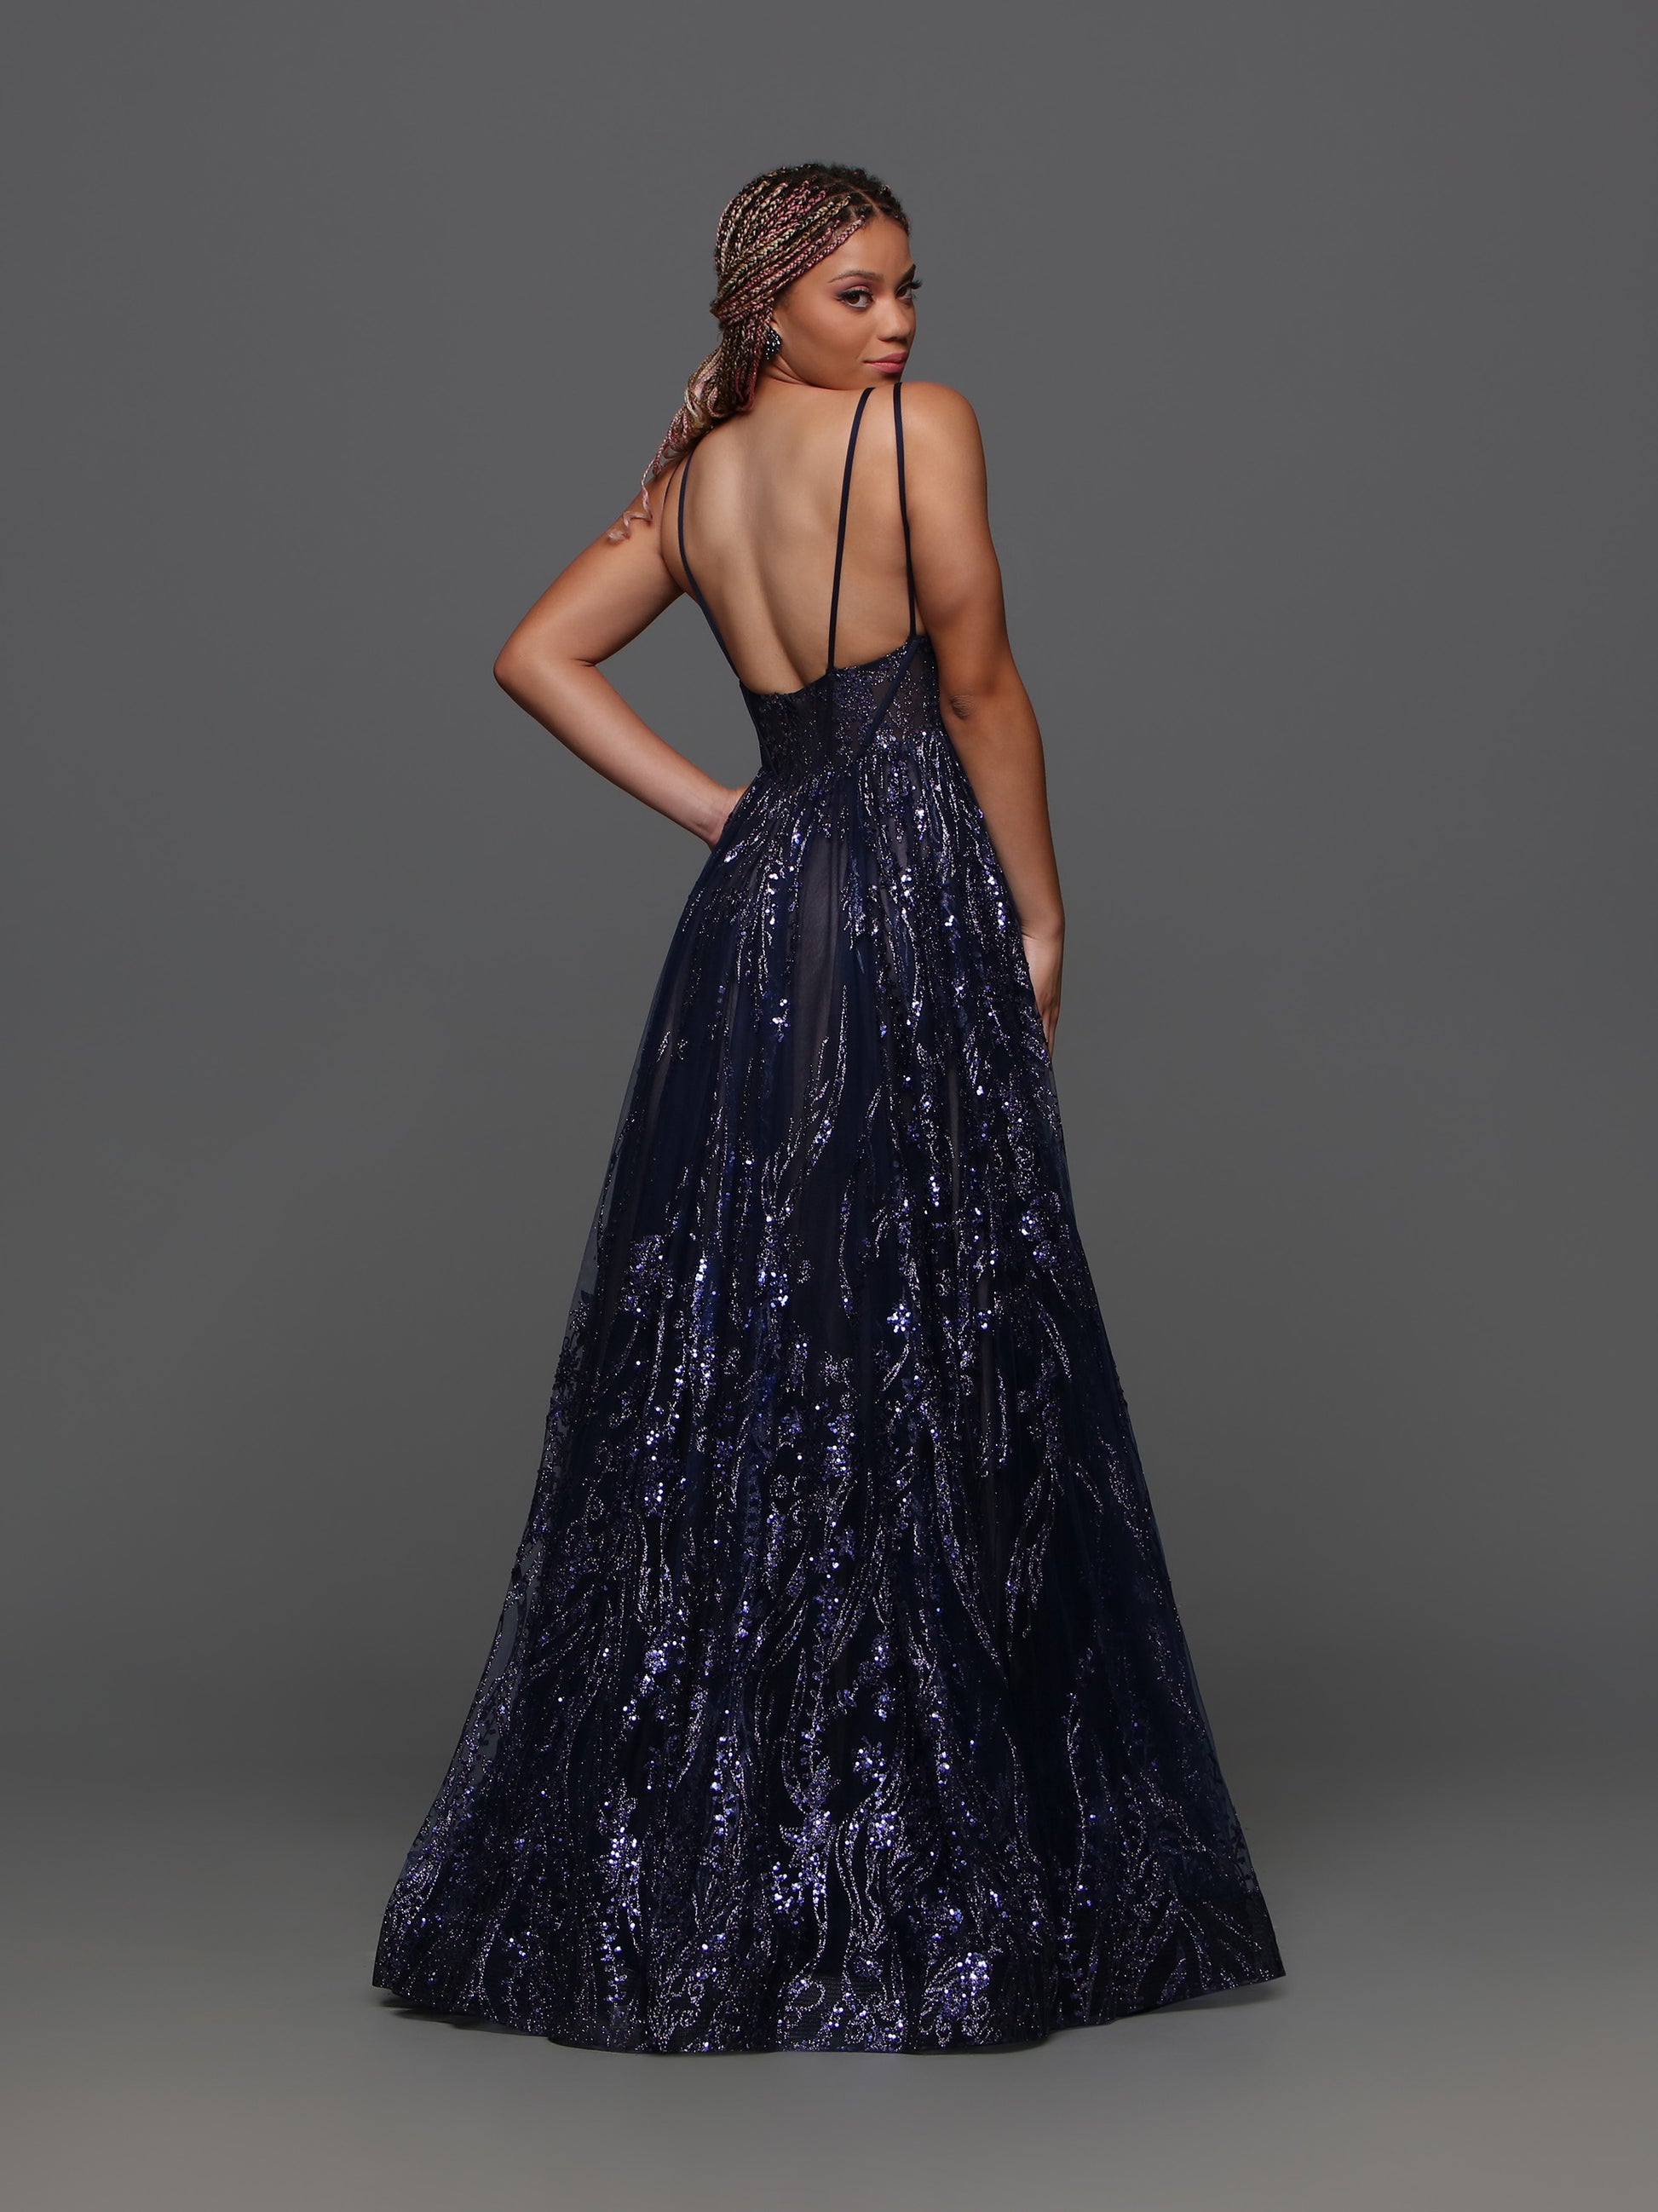 Expertly crafted for elegance and sophistication, the Candice Wang 72329 Size 20 Navy Sheer A Line Prom Dress is a stunning choice for any formal occasion. With its A-line silhouette and V-neck design, this dress flatters your curves while providing a touch of glamour. The sheer details add a hint of allure, making you the center of attention.